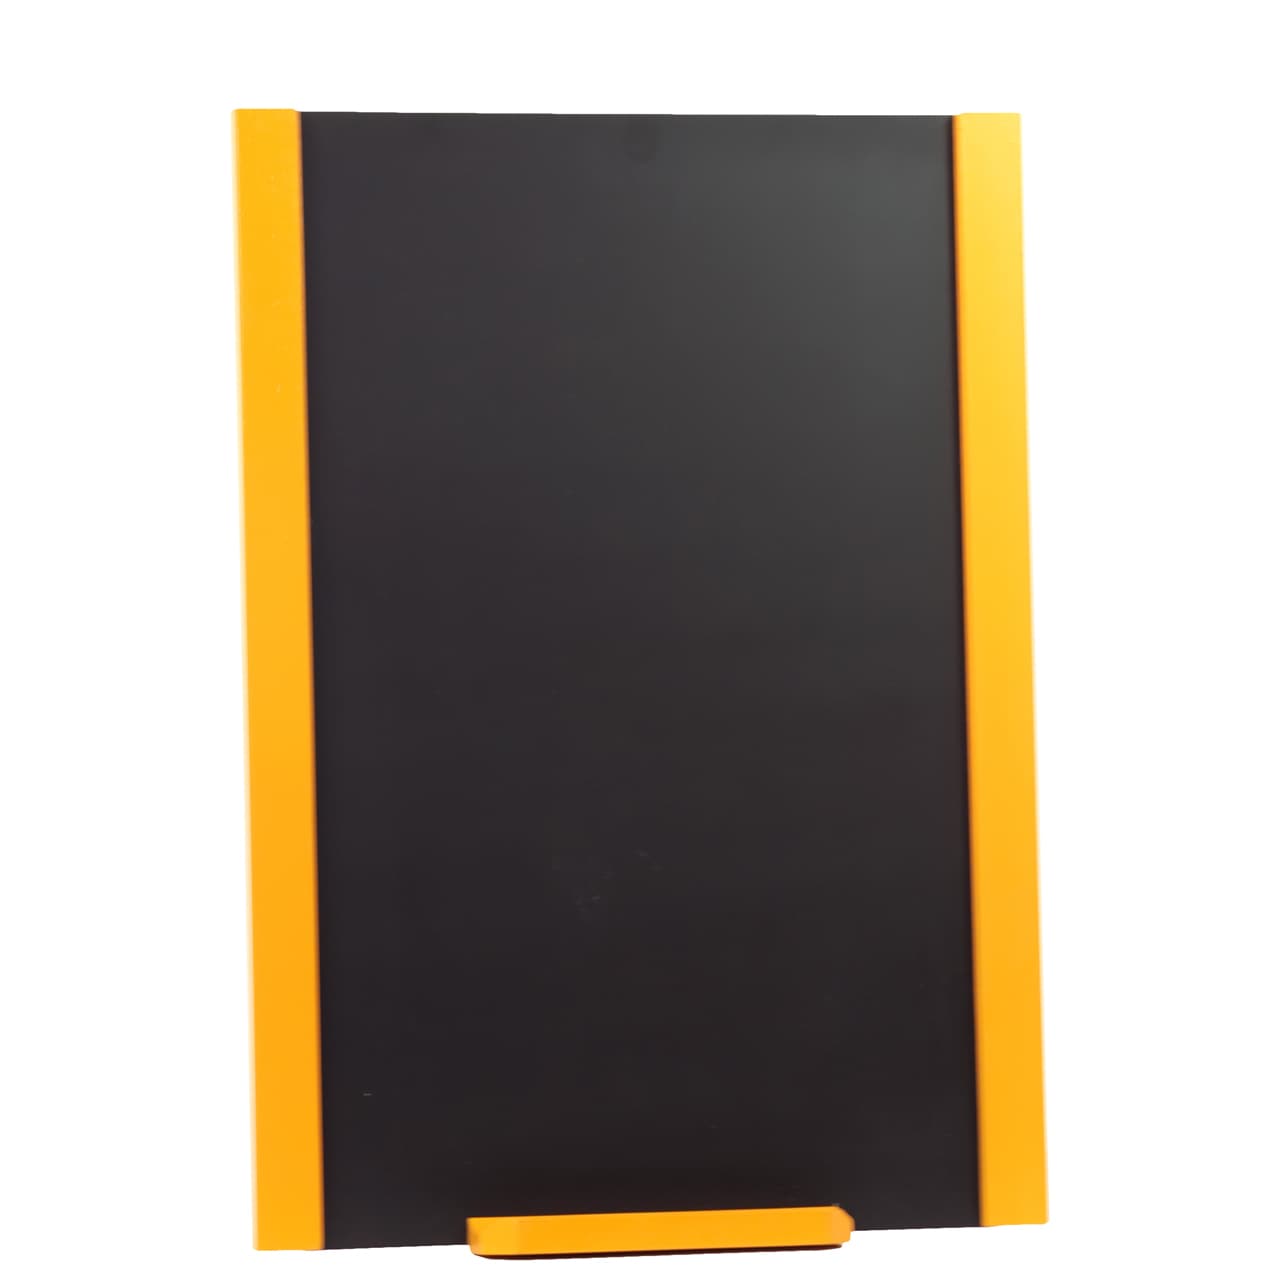 Yellow Wooden Frame Blackboard (WoodDimensions 24 inches high x 17 inches wide x 2.25 inches deep)